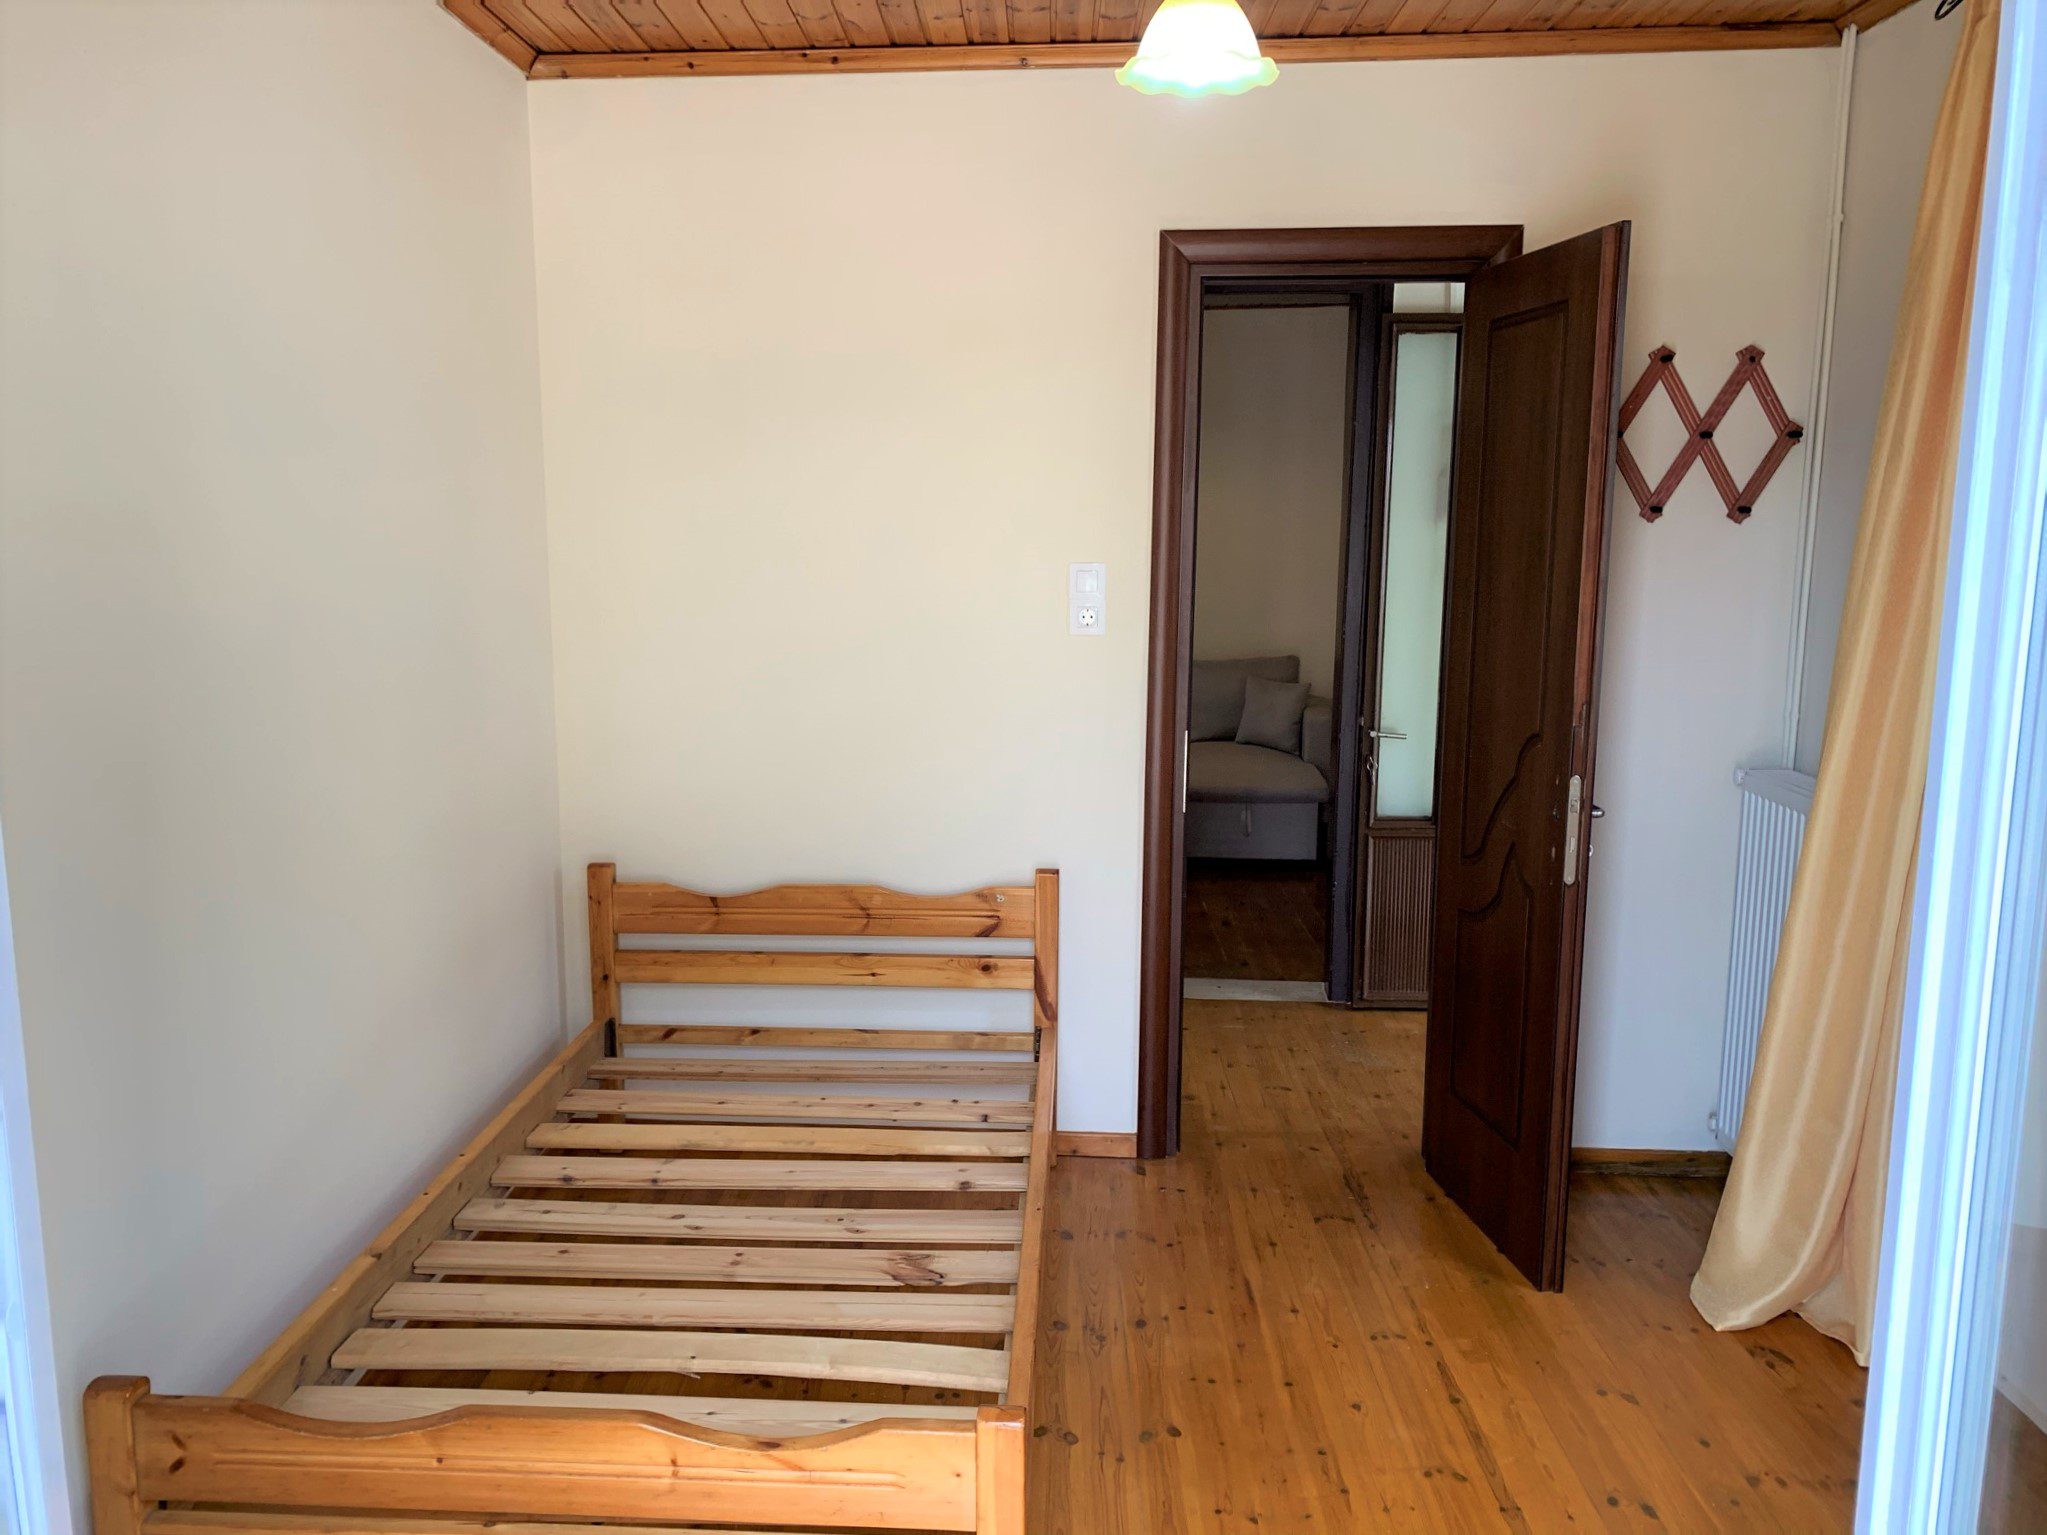 Bedrooom of house for sale in Ithaca Greece, Perachori